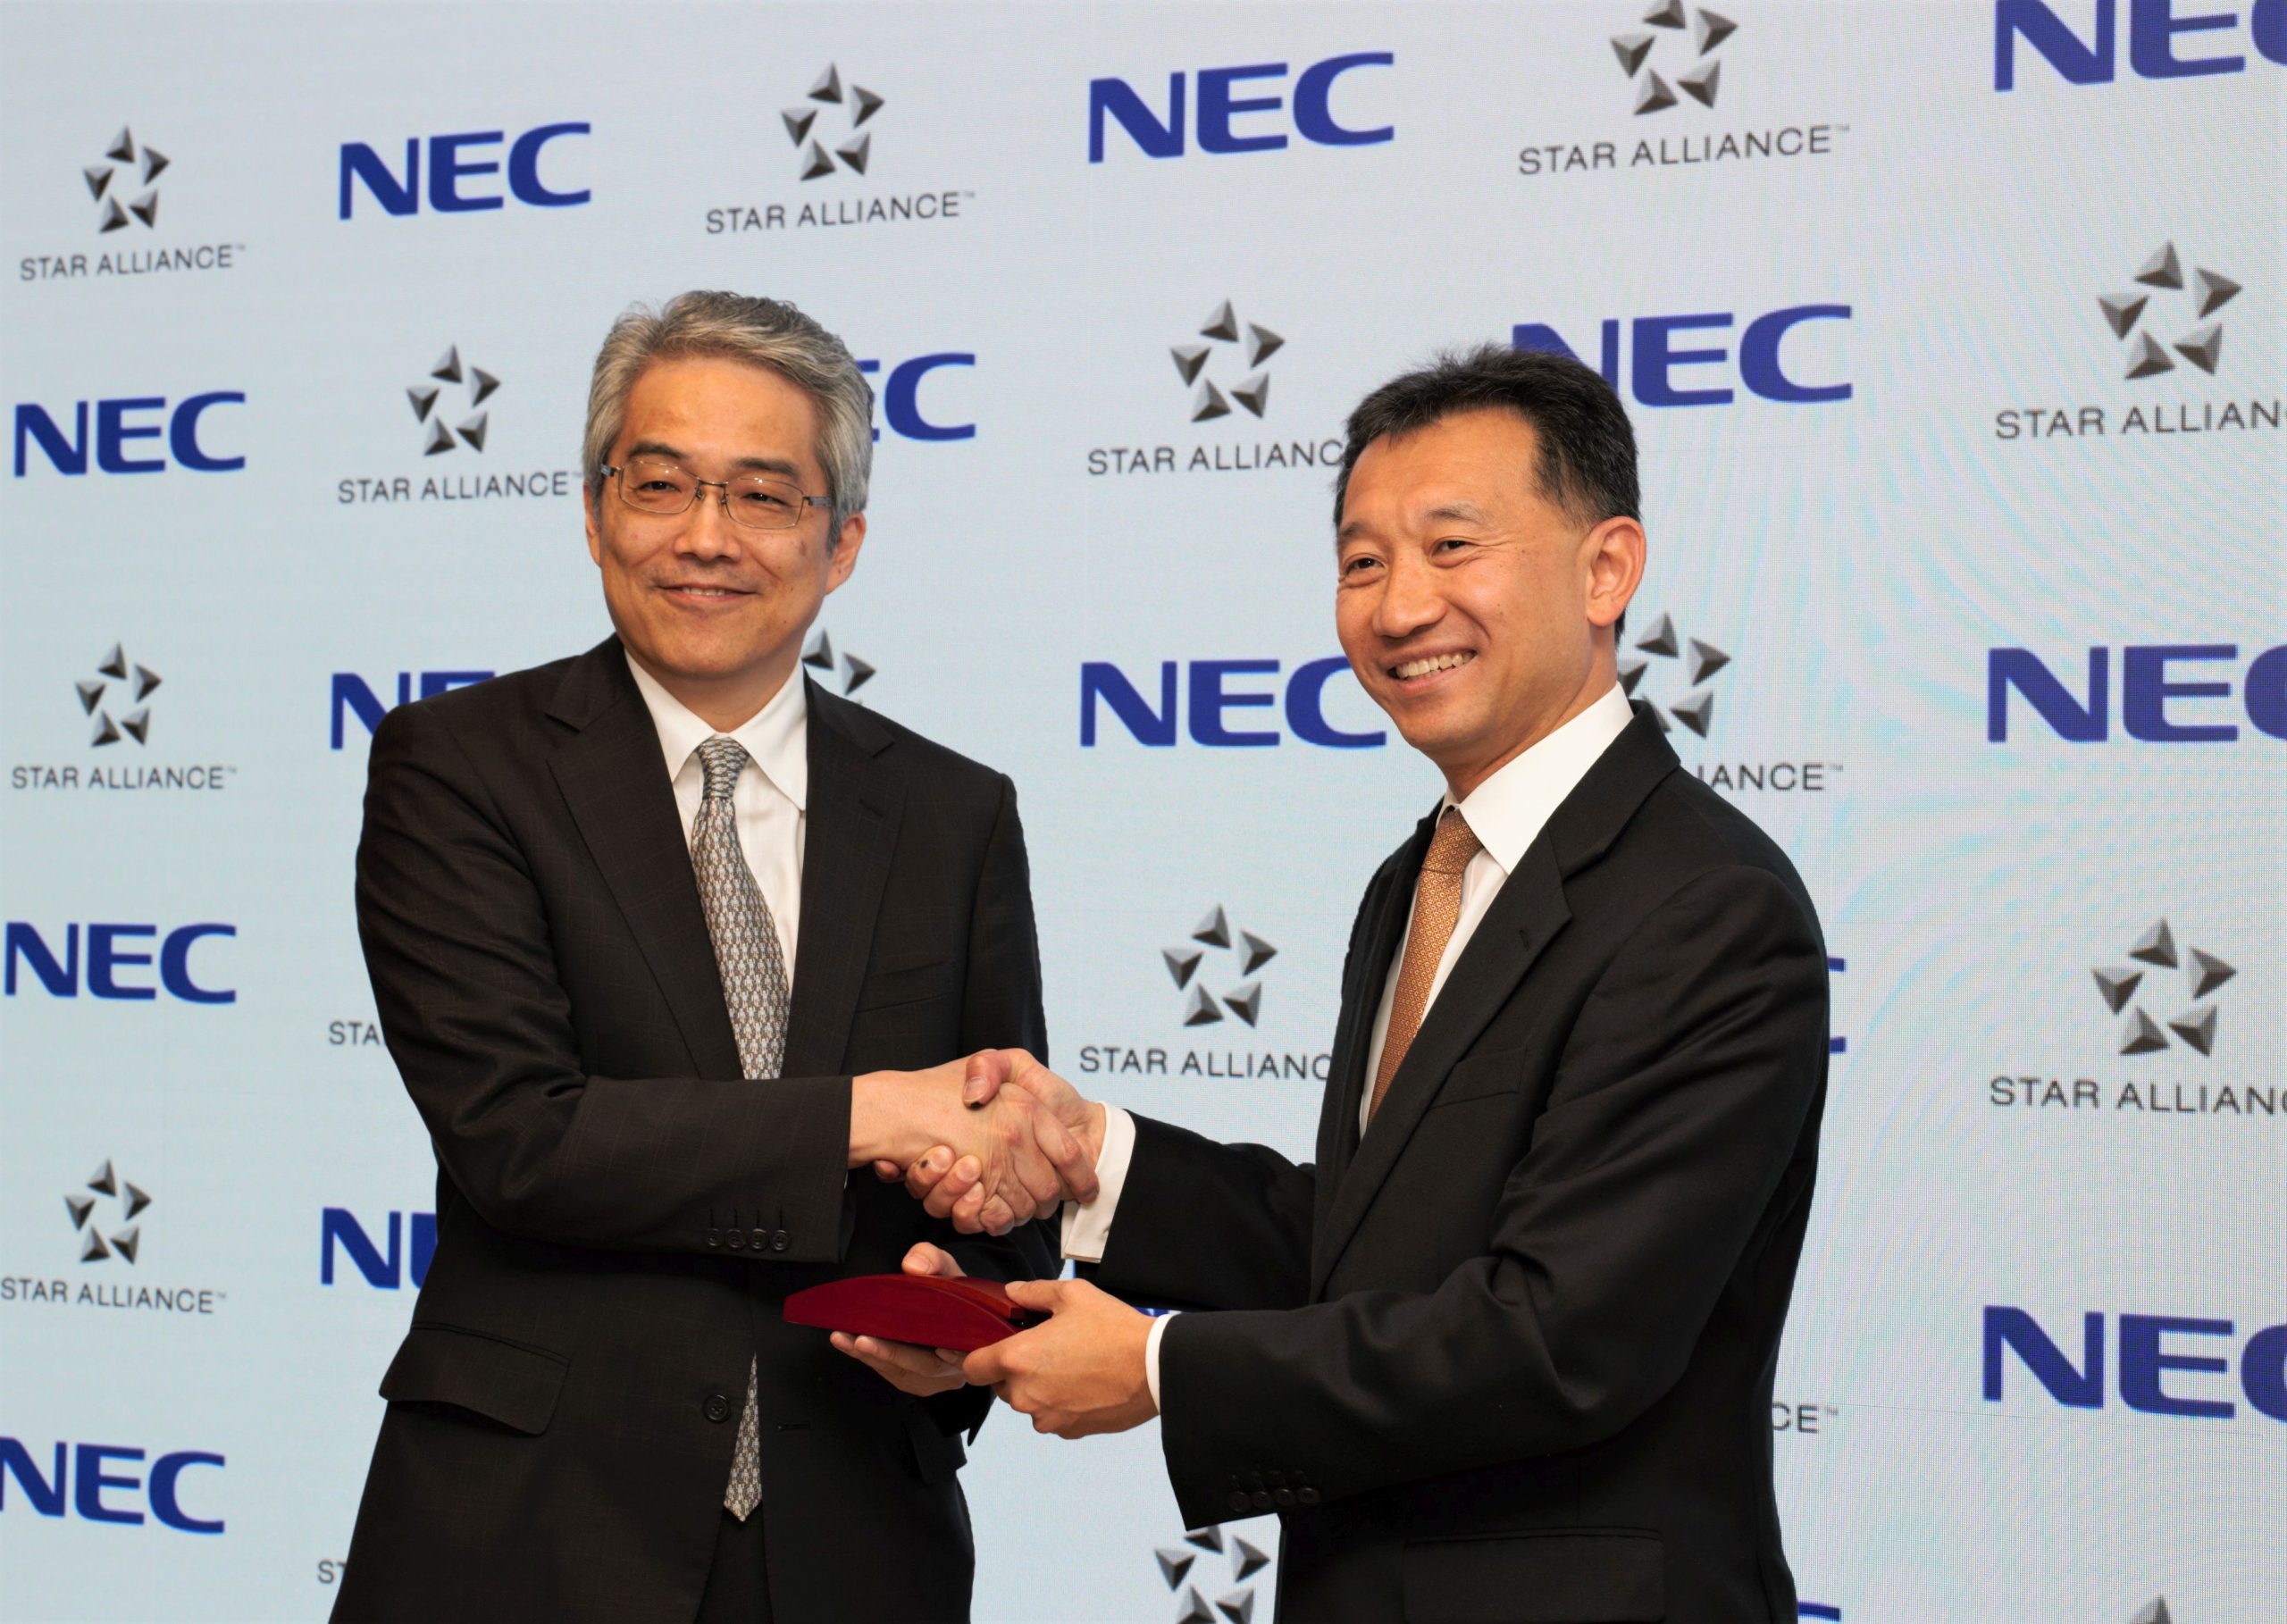 NEC, Star Alliance partner to better customer experience by biometric data recognition